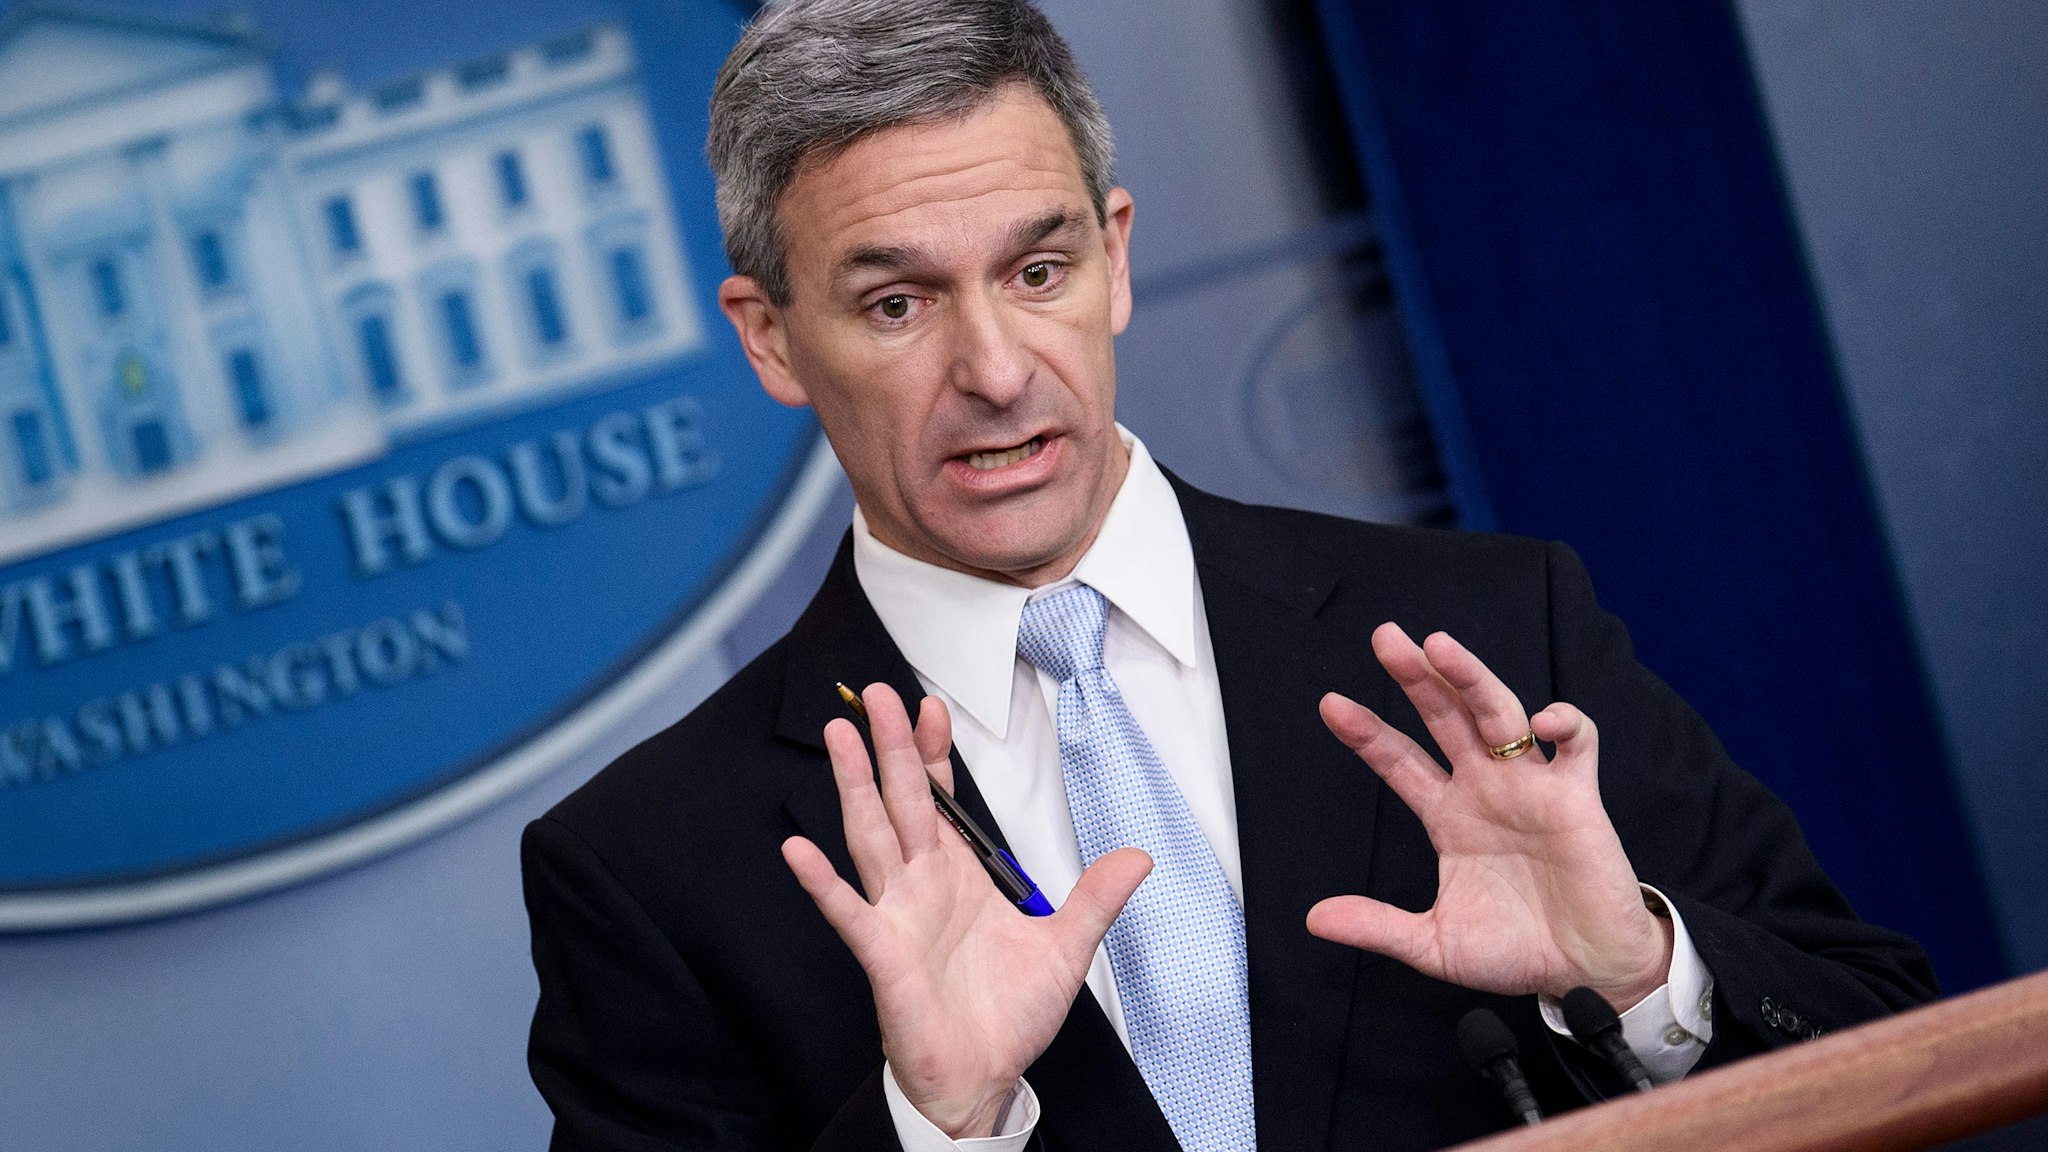 Acting Director of the US Citizenship and Immigration Services Ken Cuccinelli speaks during a briefing at the White House August 12, 2019, in Washington, DC. - The administration of US President Donald Trump announced Monday new rules that aim to deny permanent residency and citizenship benefits to migrants who receive food stamps, Medicaid and other public welfare.Announcing a new definition of the longstanding "public charge" law, the White House said migrants will be blocked from entering the country if they are likely to need public assistance, and those already here will not be able to obtain green cards or US citizenship.